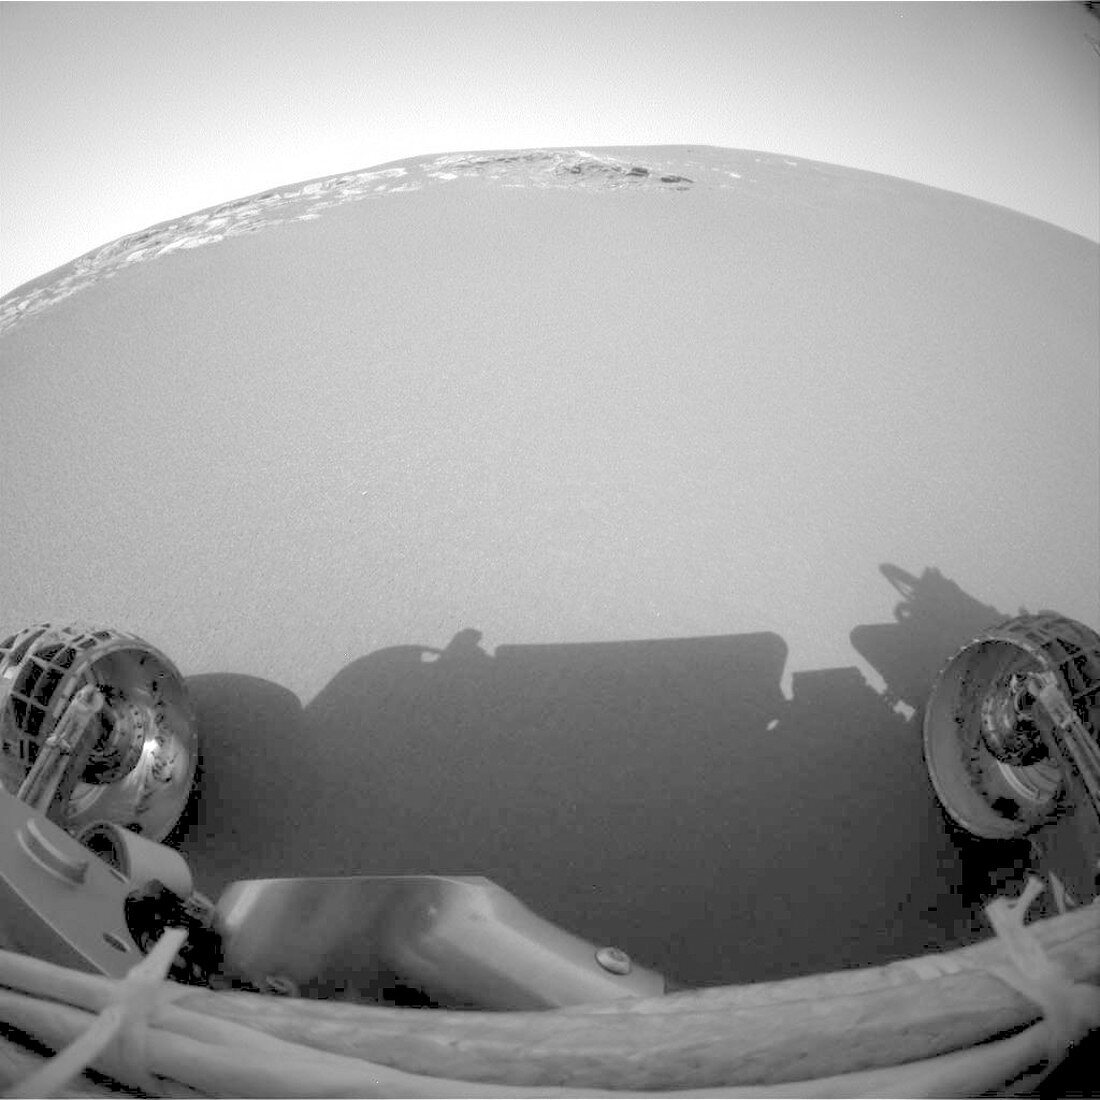 Opportunity rover on Mars